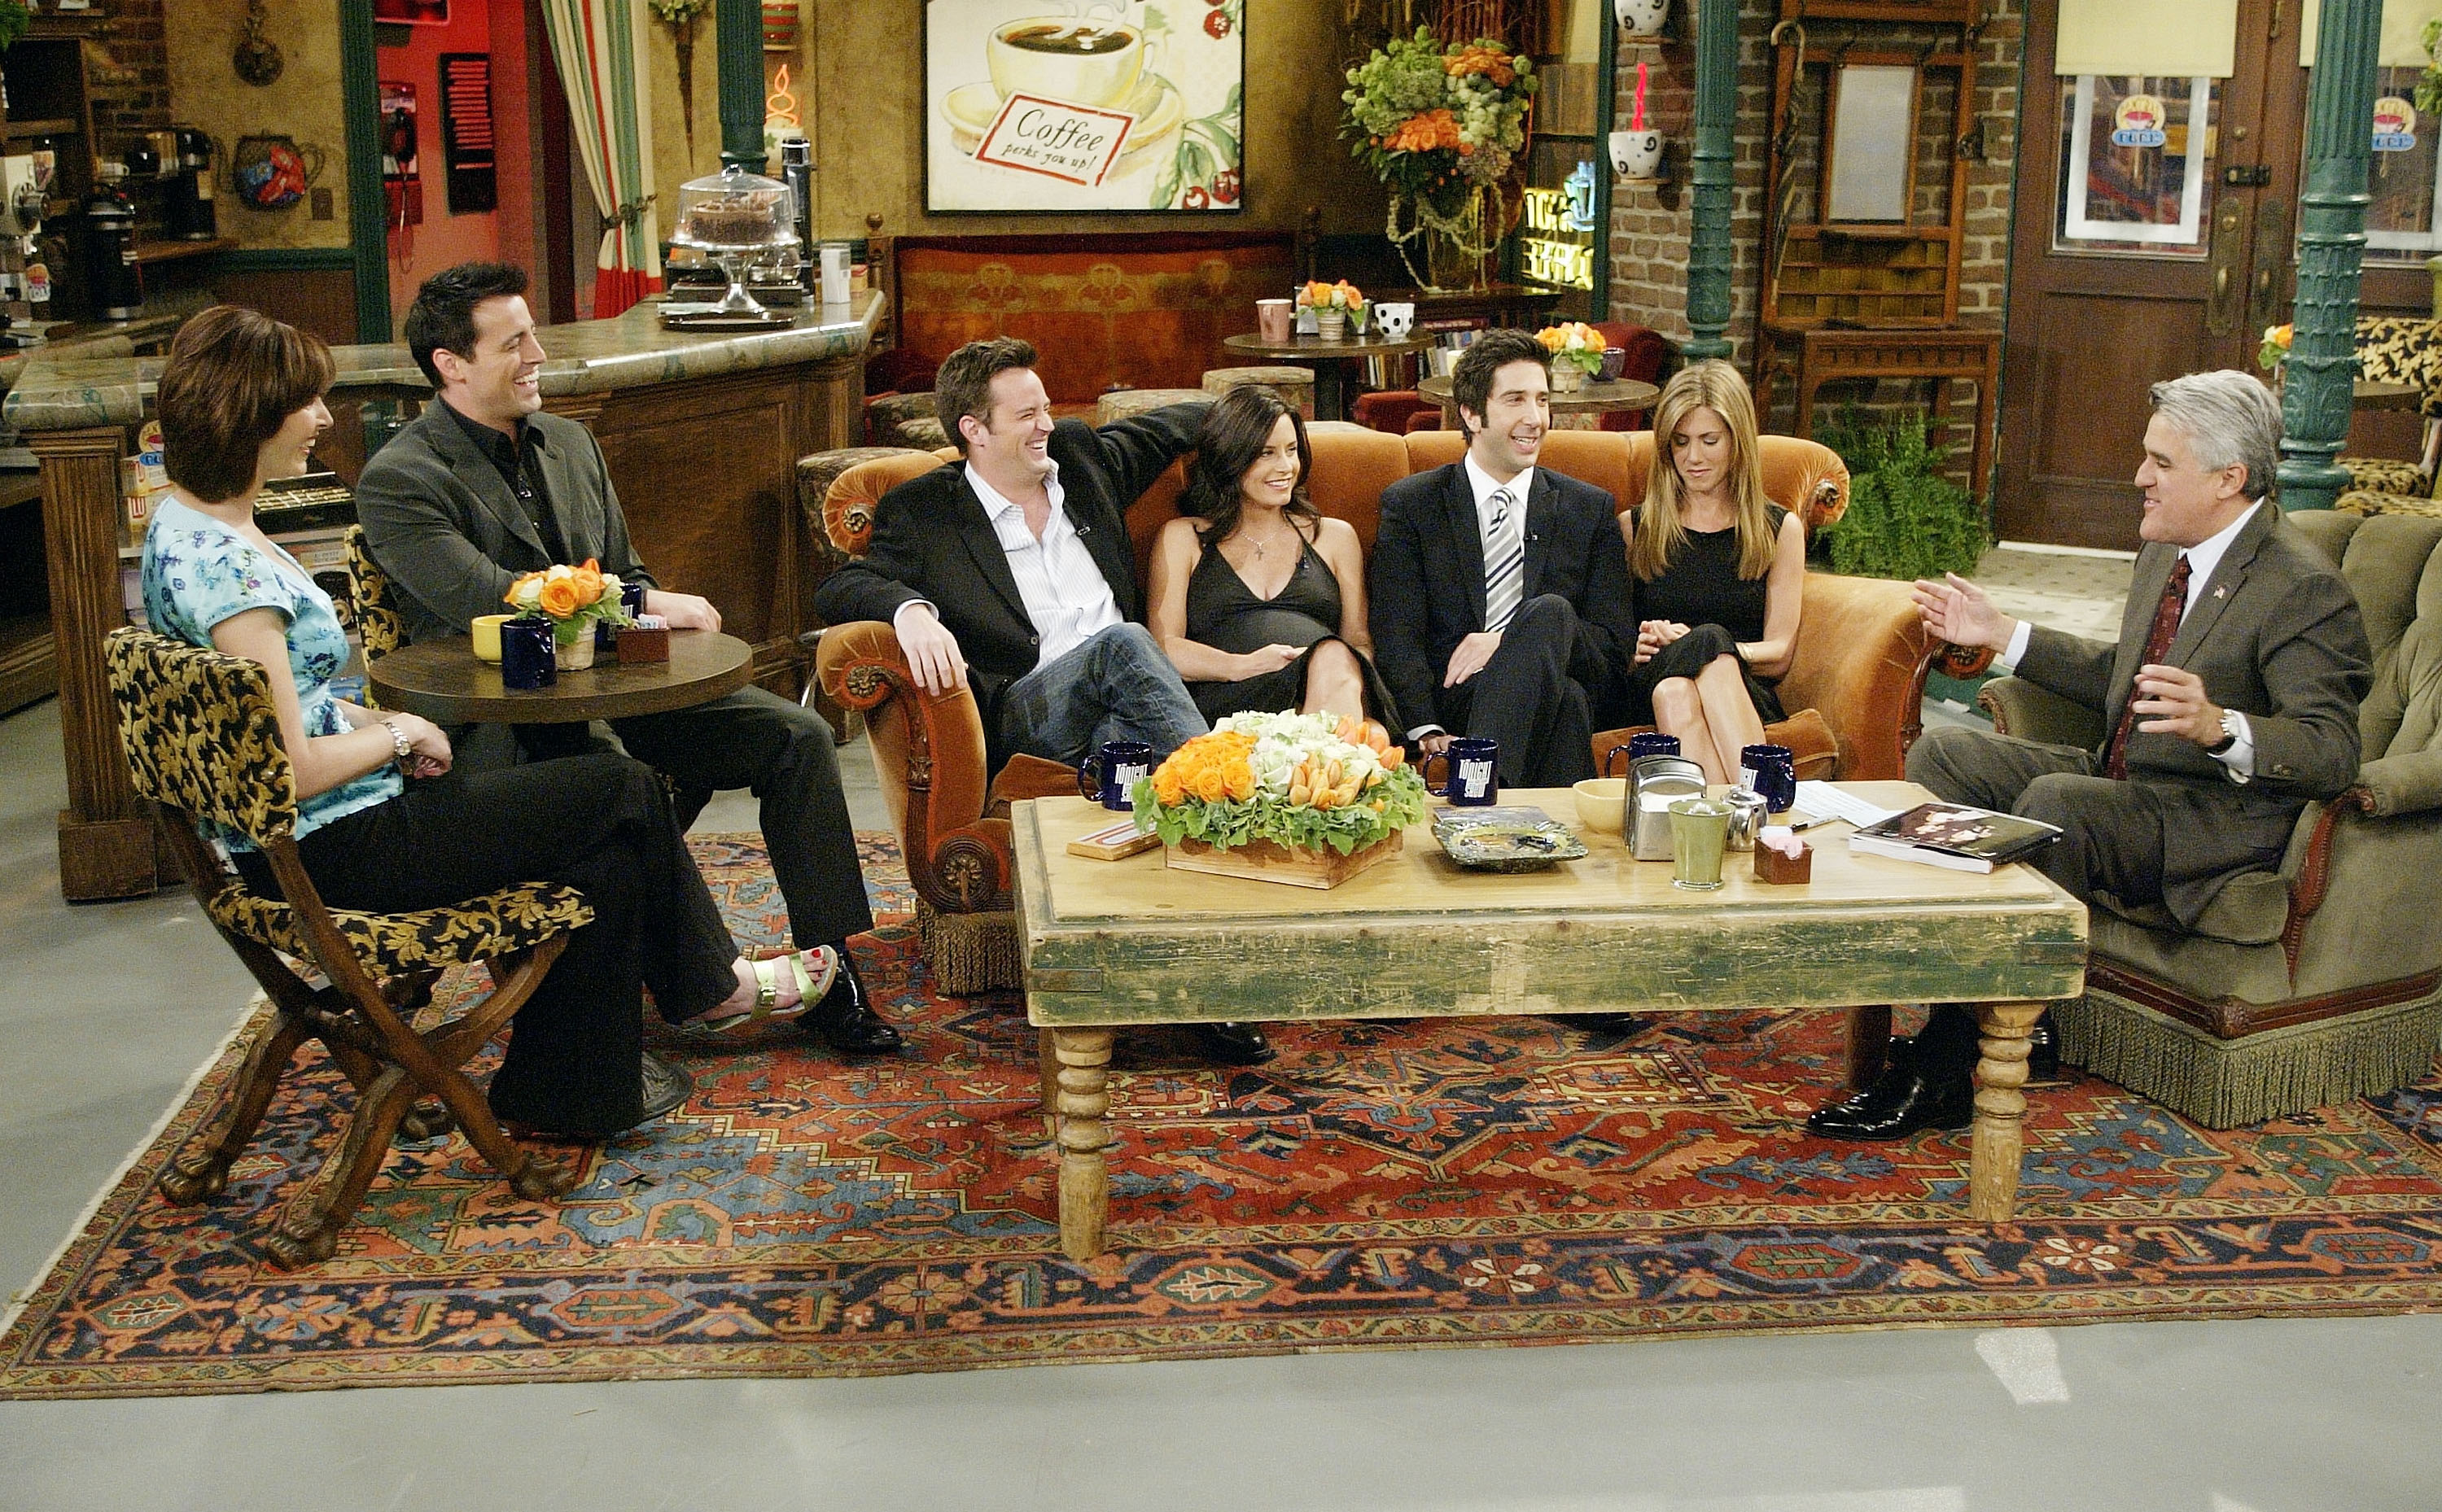 LOS ANGELES - MAY 6: (L-R) In this handout photo provided by NBC, the cast of "Friends", actors Lisa Kudrow, Matt LeBlanc, Matthew Perry, Courteney Cox-Arquette, David Schwimmer and Jennifer Aniston sat down with Jay Leno for a special "Tonight Show," on the set of Central Perk on May 6, 2004 in Los Angeles, California. (Photo by Paul Drinkwater/NBC via Getty Images)